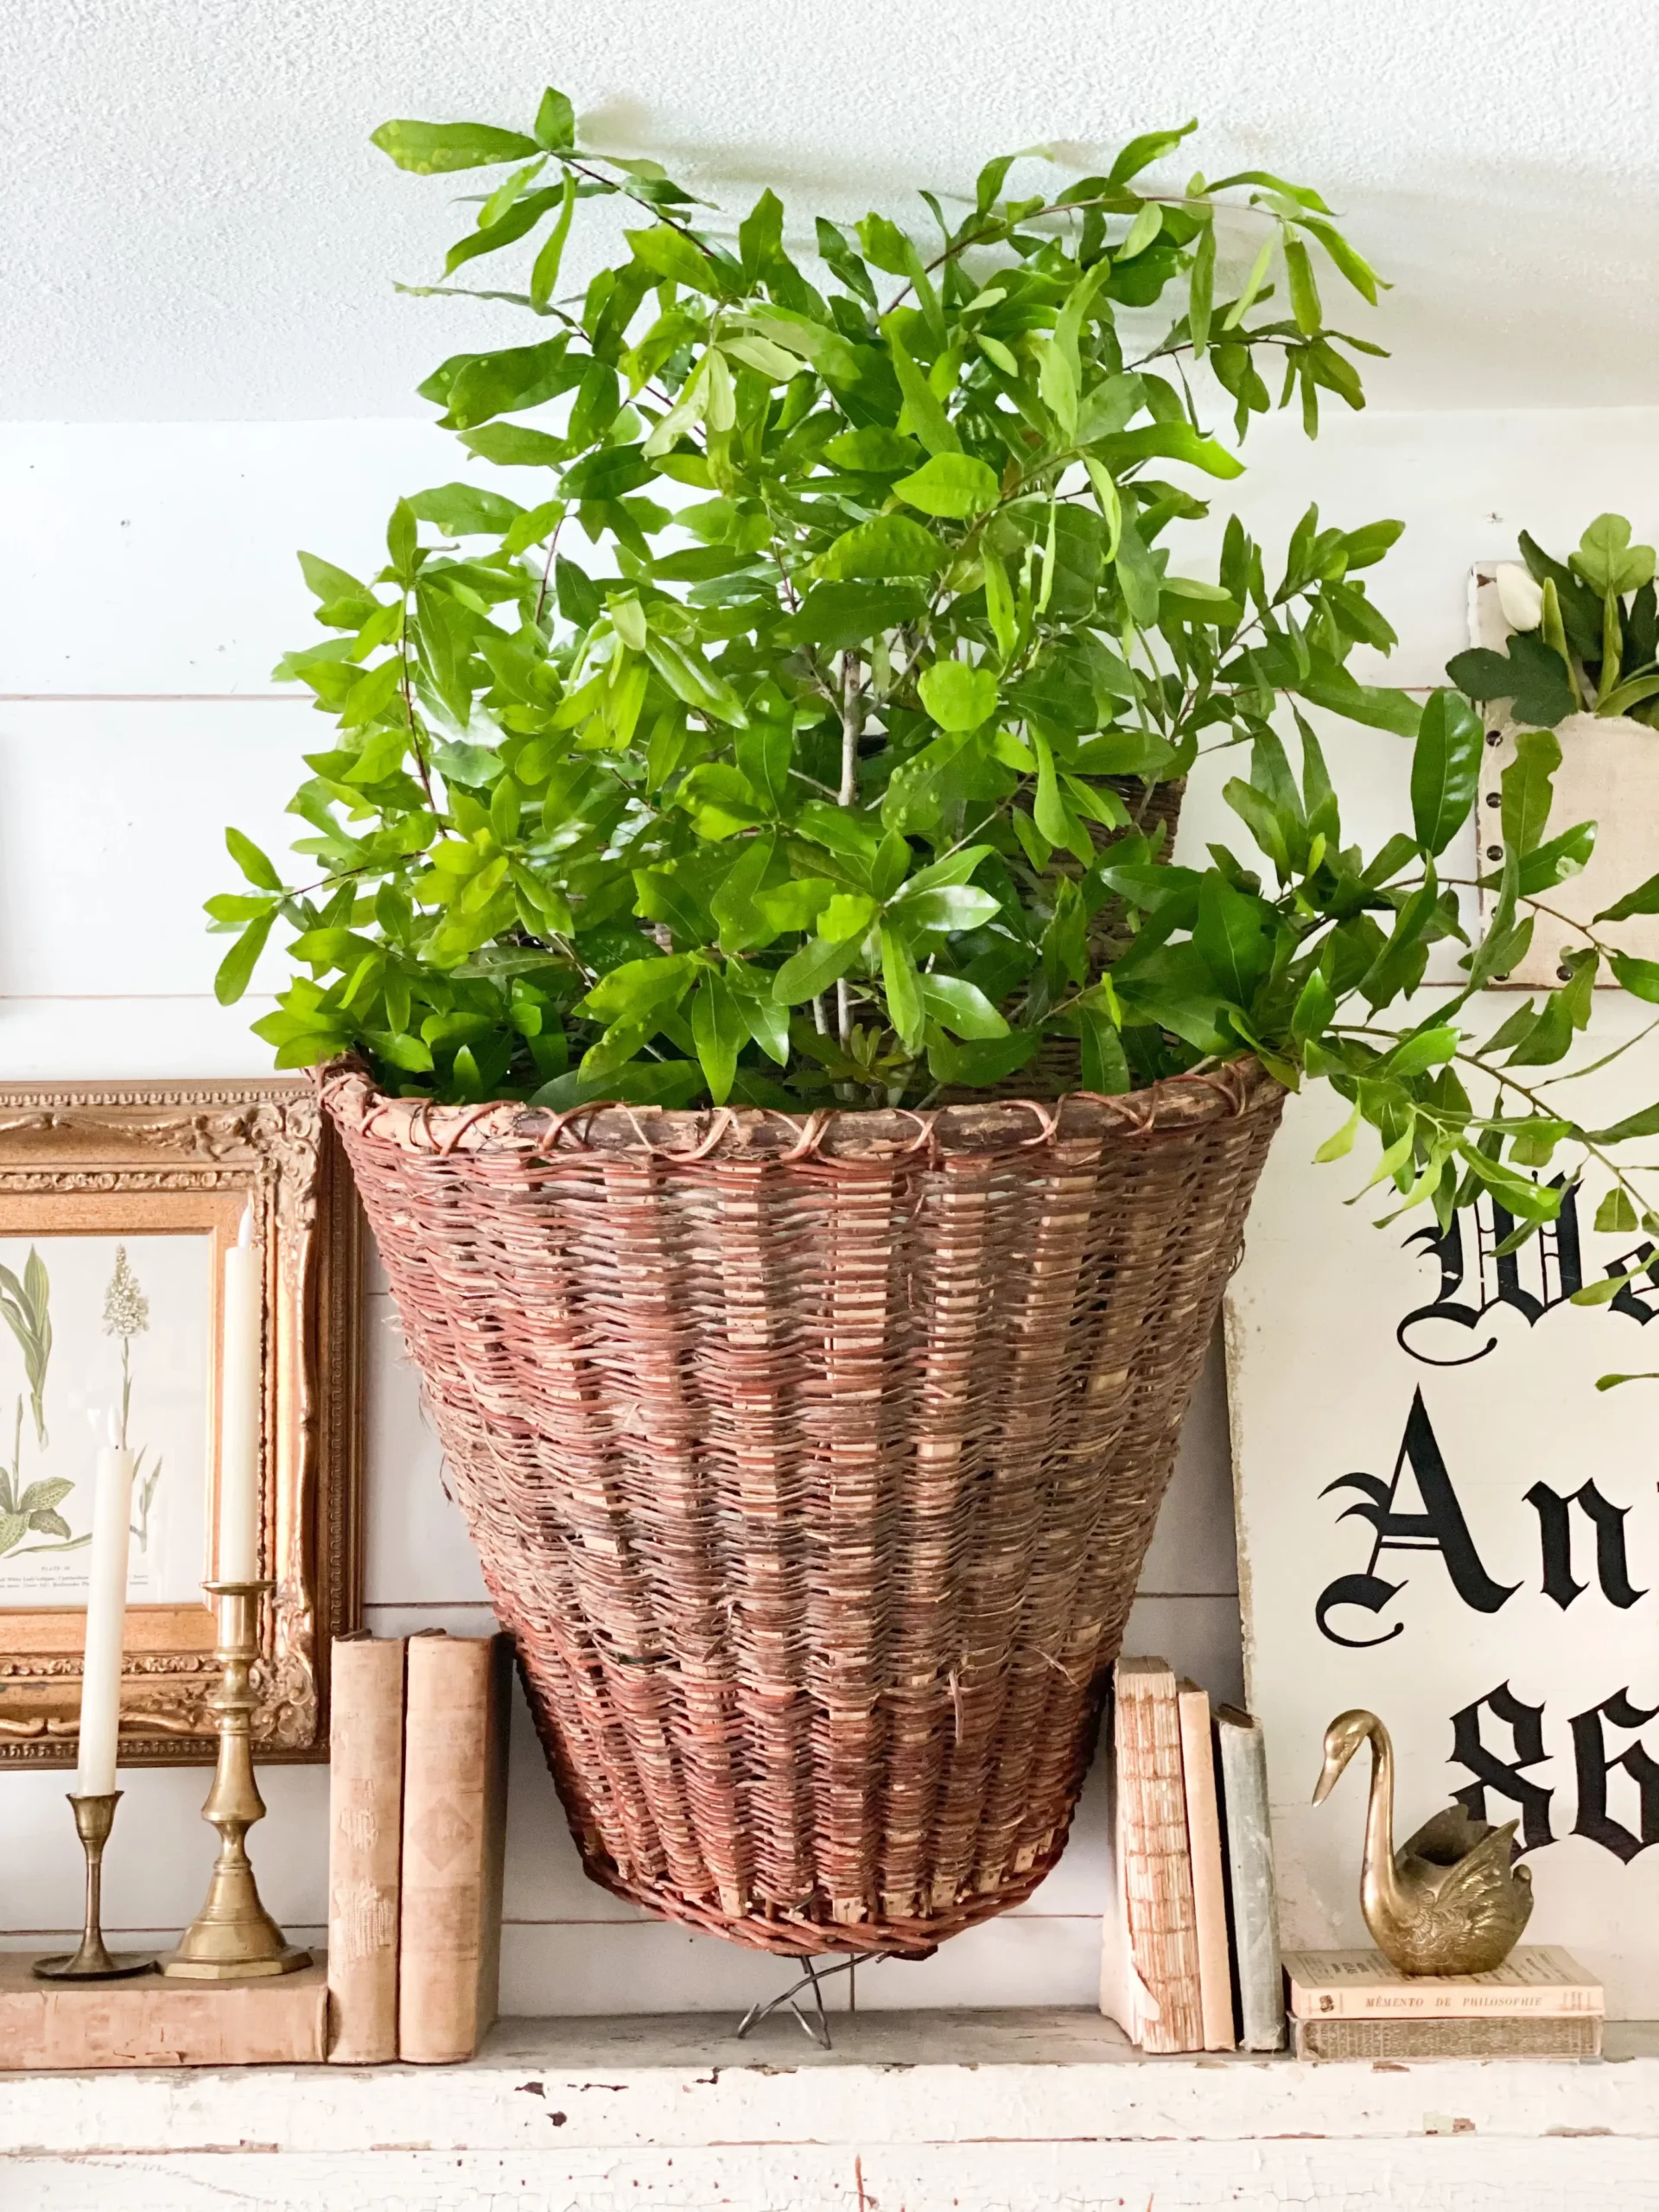 large basket hung up on the wall with fresh greenery clipped from outside